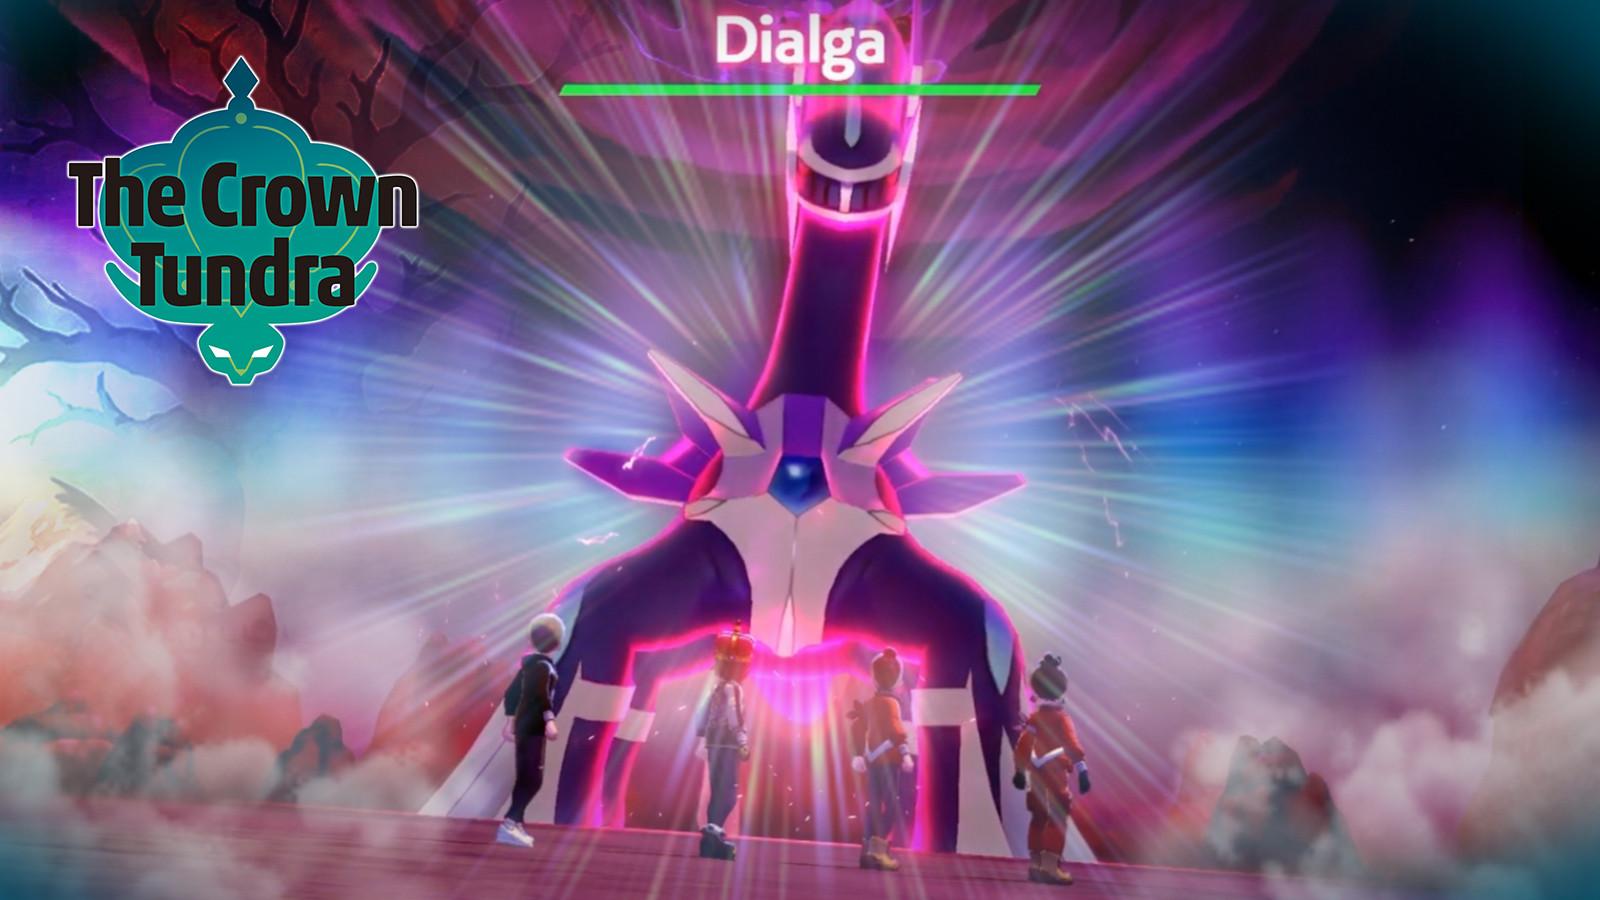 Pokemon Crown Tundra: How To Catch and Find Dialga and Palkia!